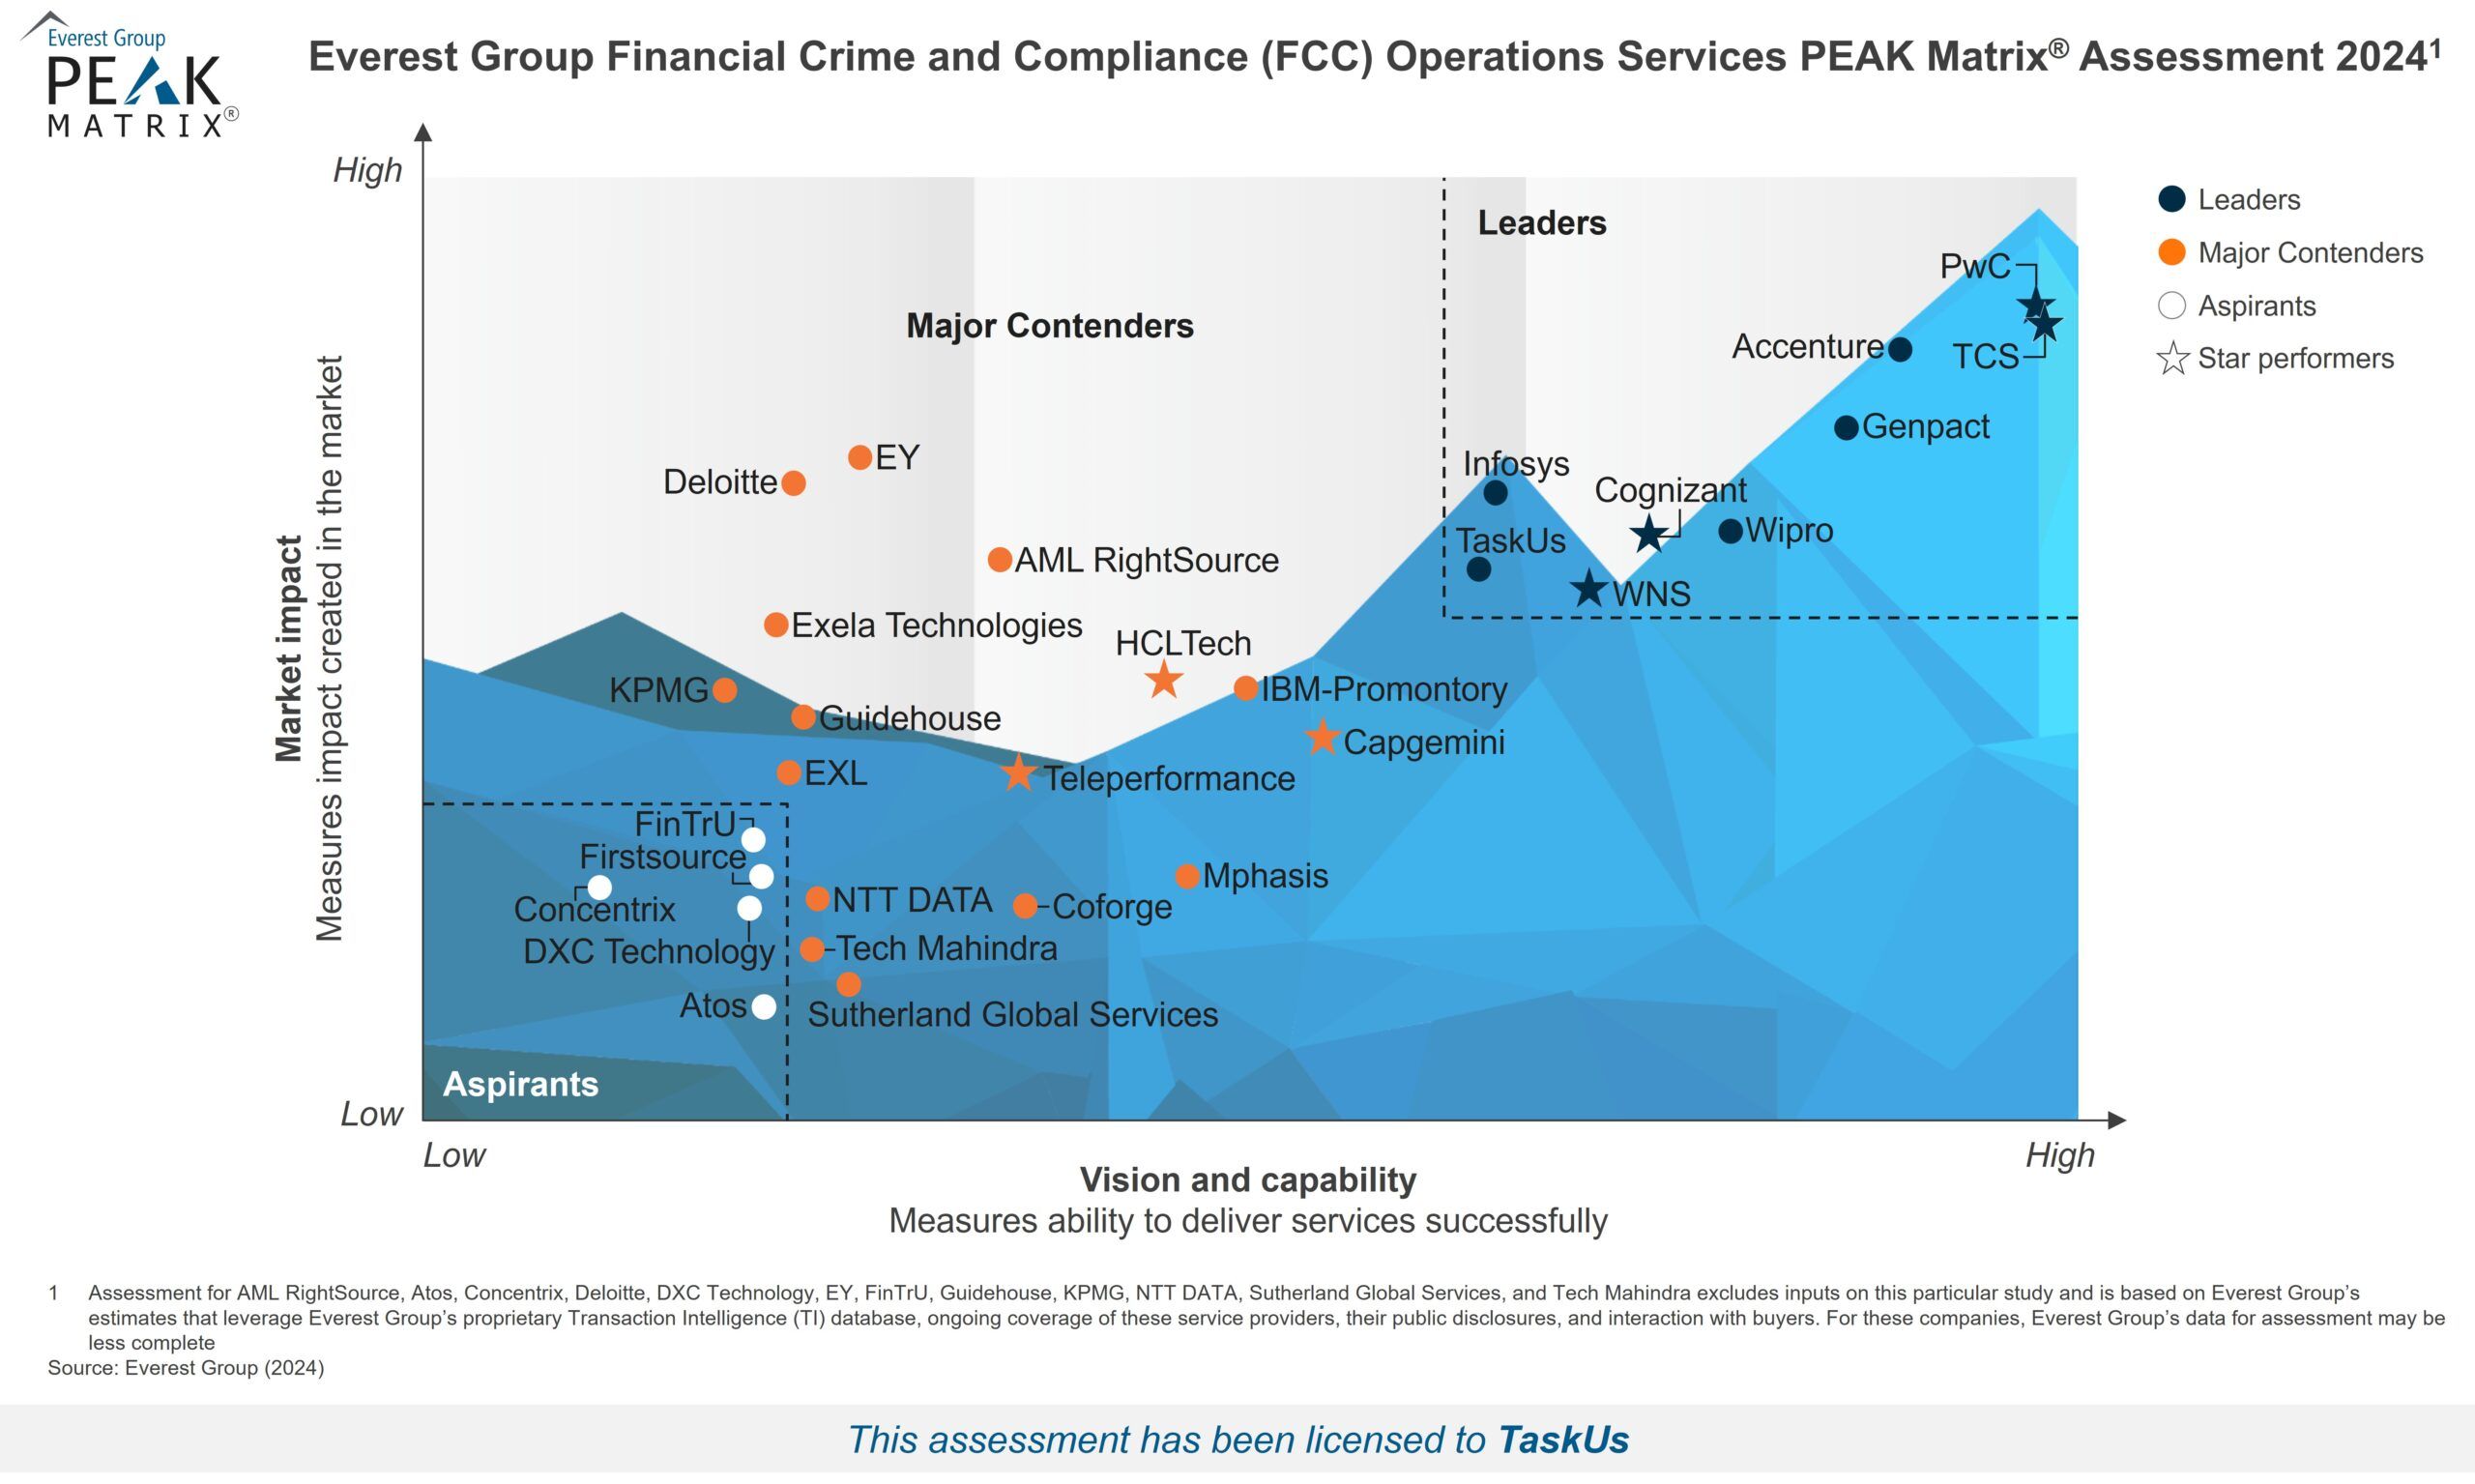 Everest Group’s Financial Crime and Compliance (FCC) Operations – Services PEAK Matrix® Assessment 2024